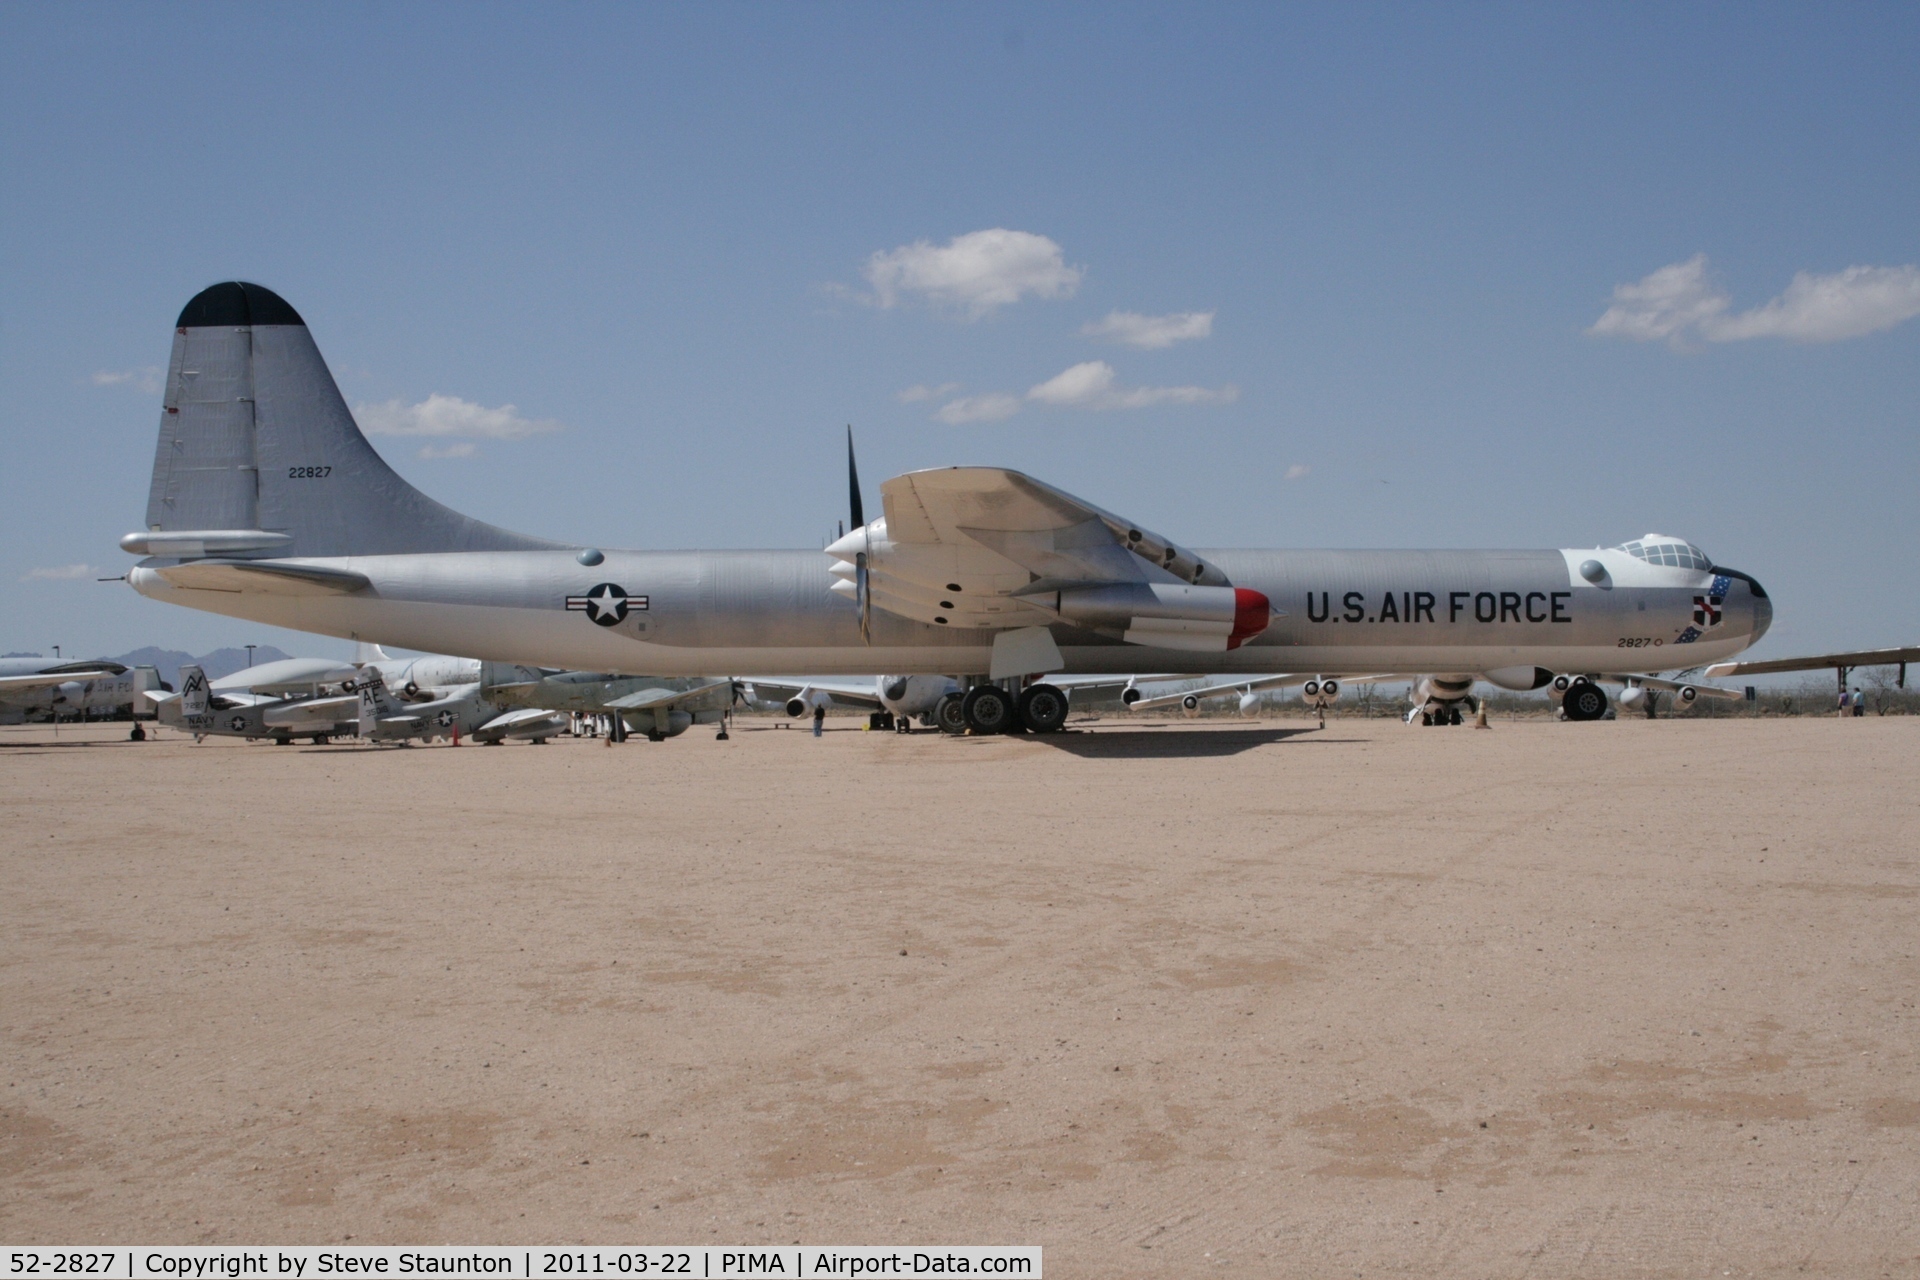 52-2827, 1952 Convair B-36J-10-CF Peacemaker C/N 383, Taken at Pima Air and Space Museum, in March 2011 whilst on an Aeroprint Aviation tour